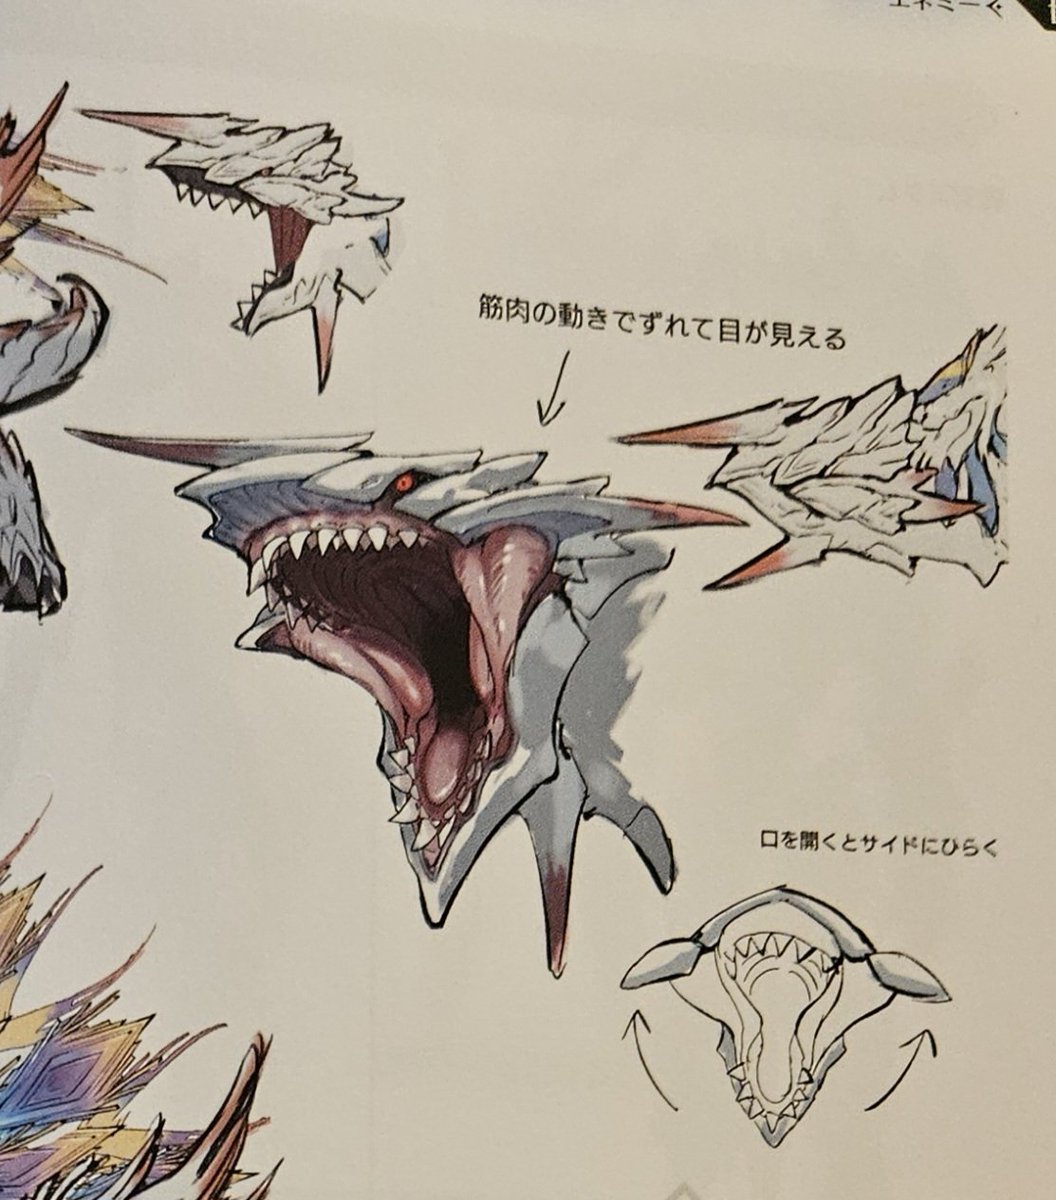 you have no idea how badly I need a crossover between monster hunter and xenoblade because holy shit dude